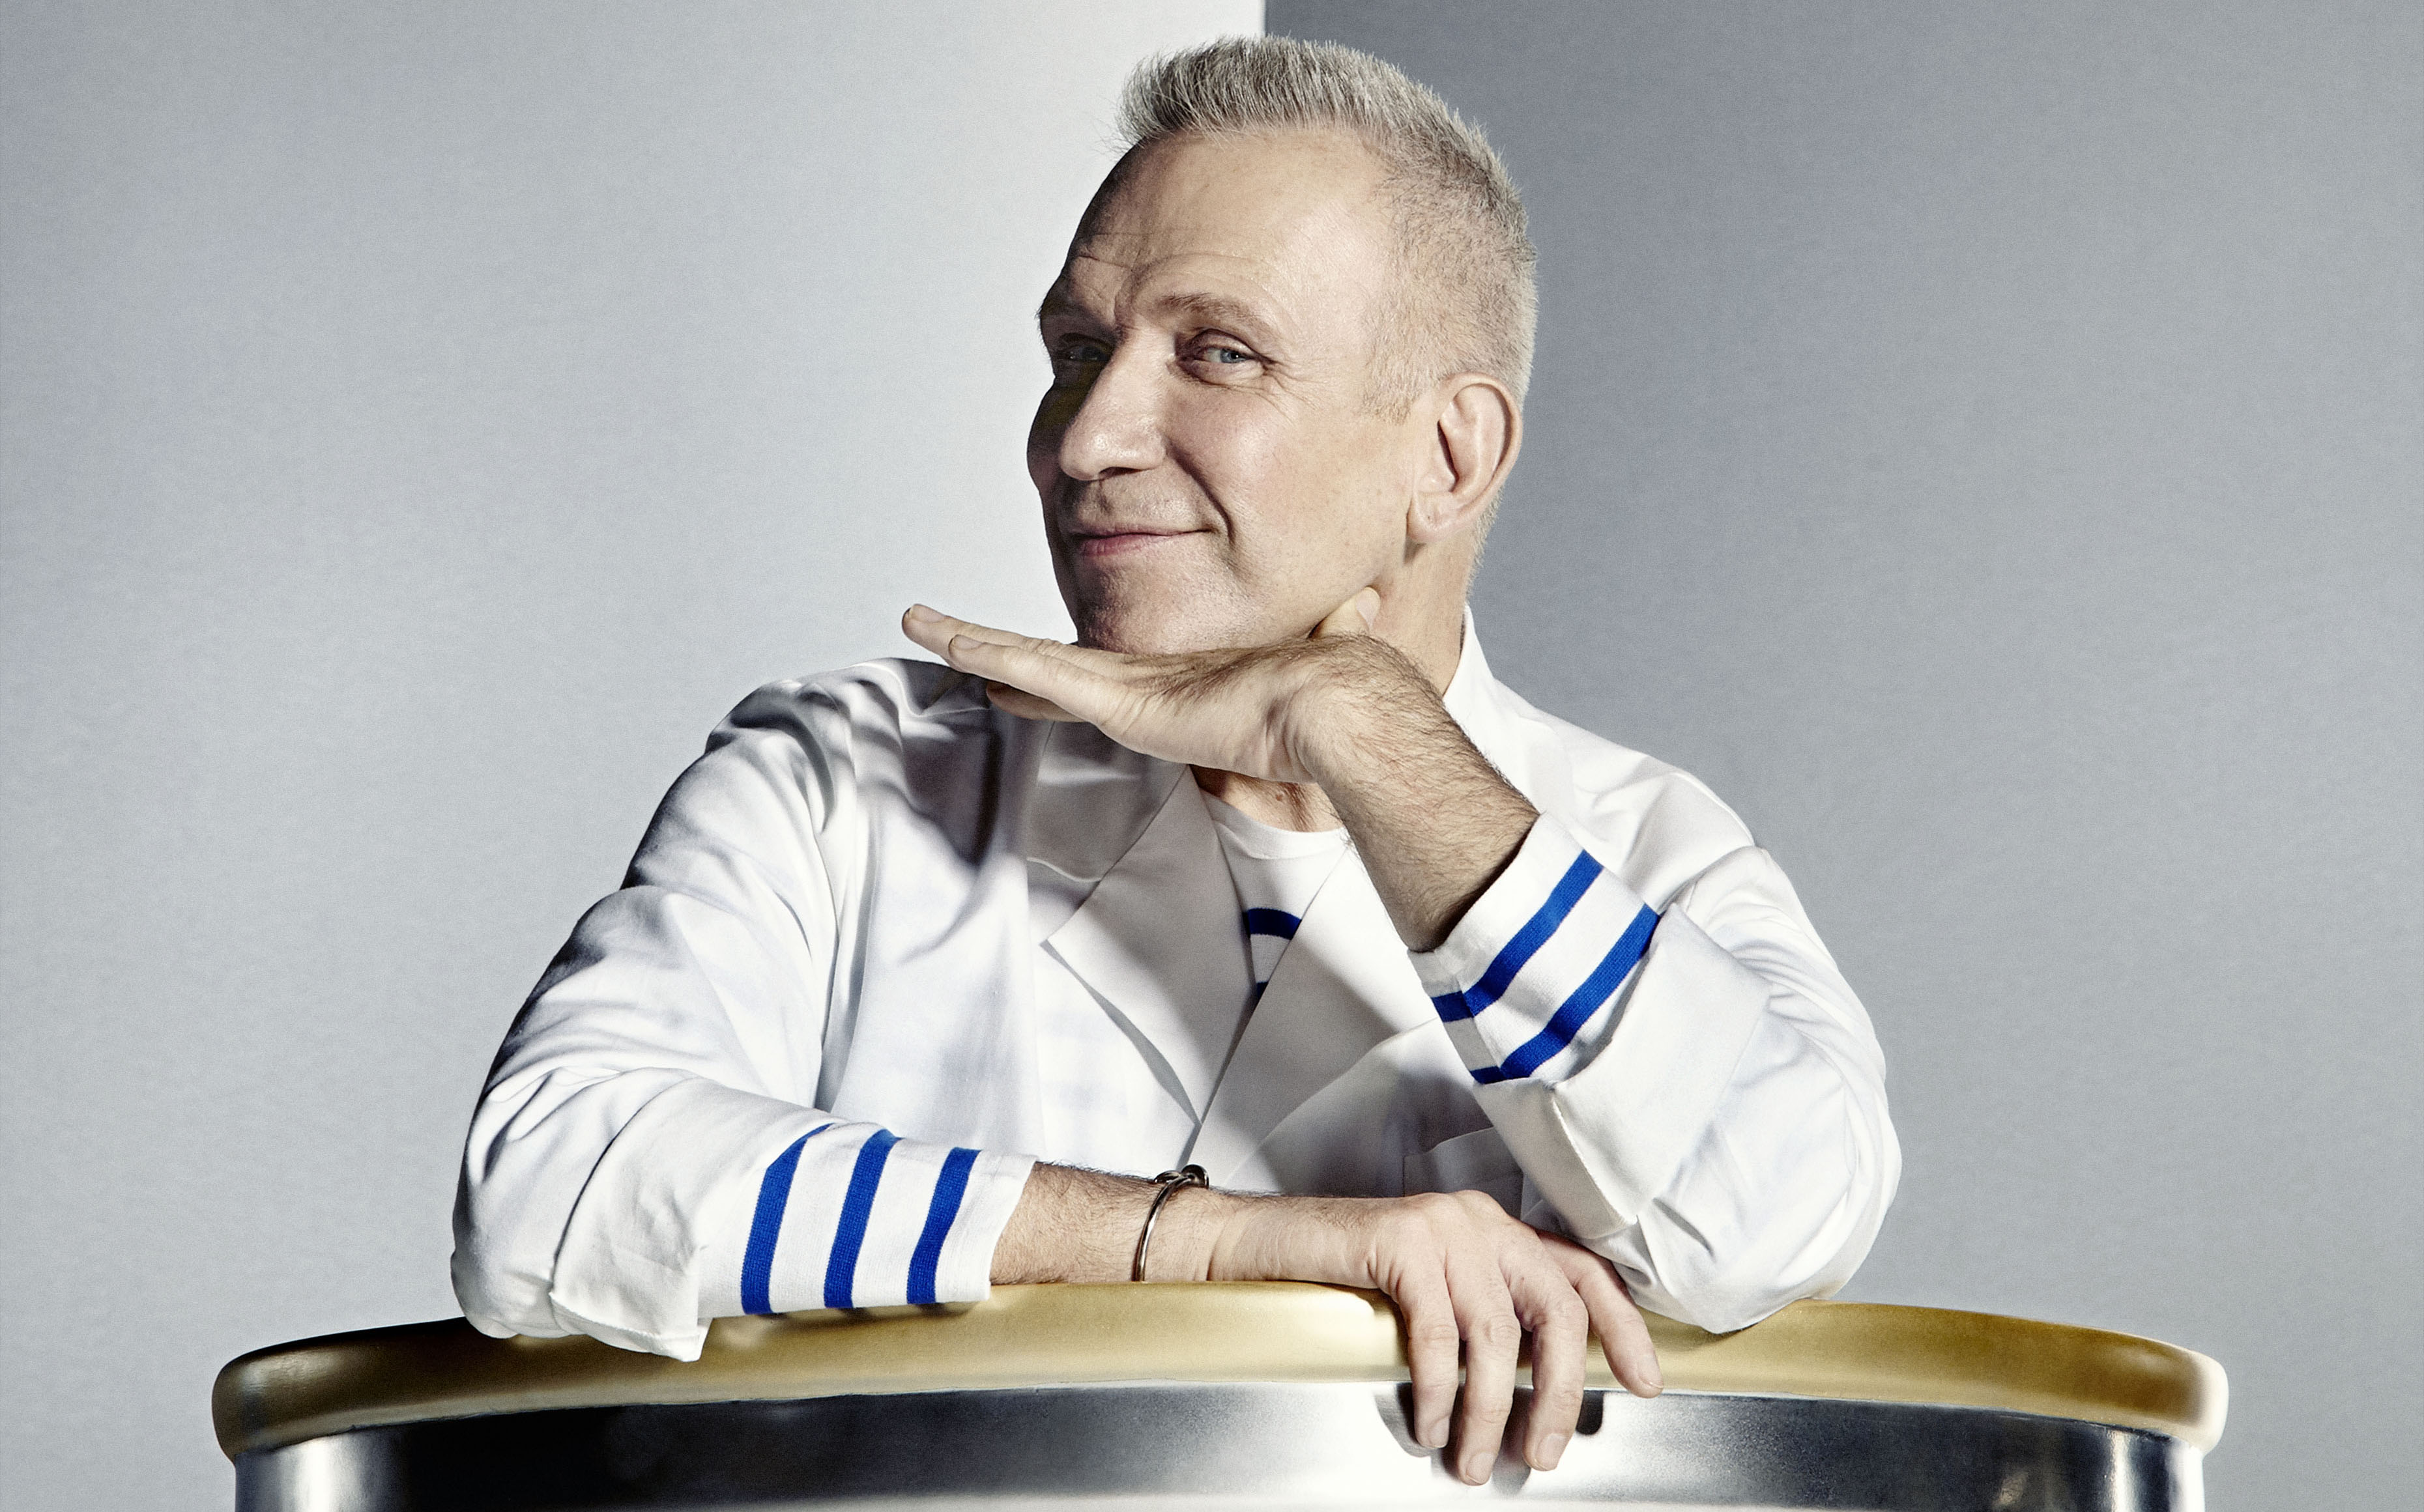 Jean Paul Gaultier on Fashion Freak Show and why “there's not one